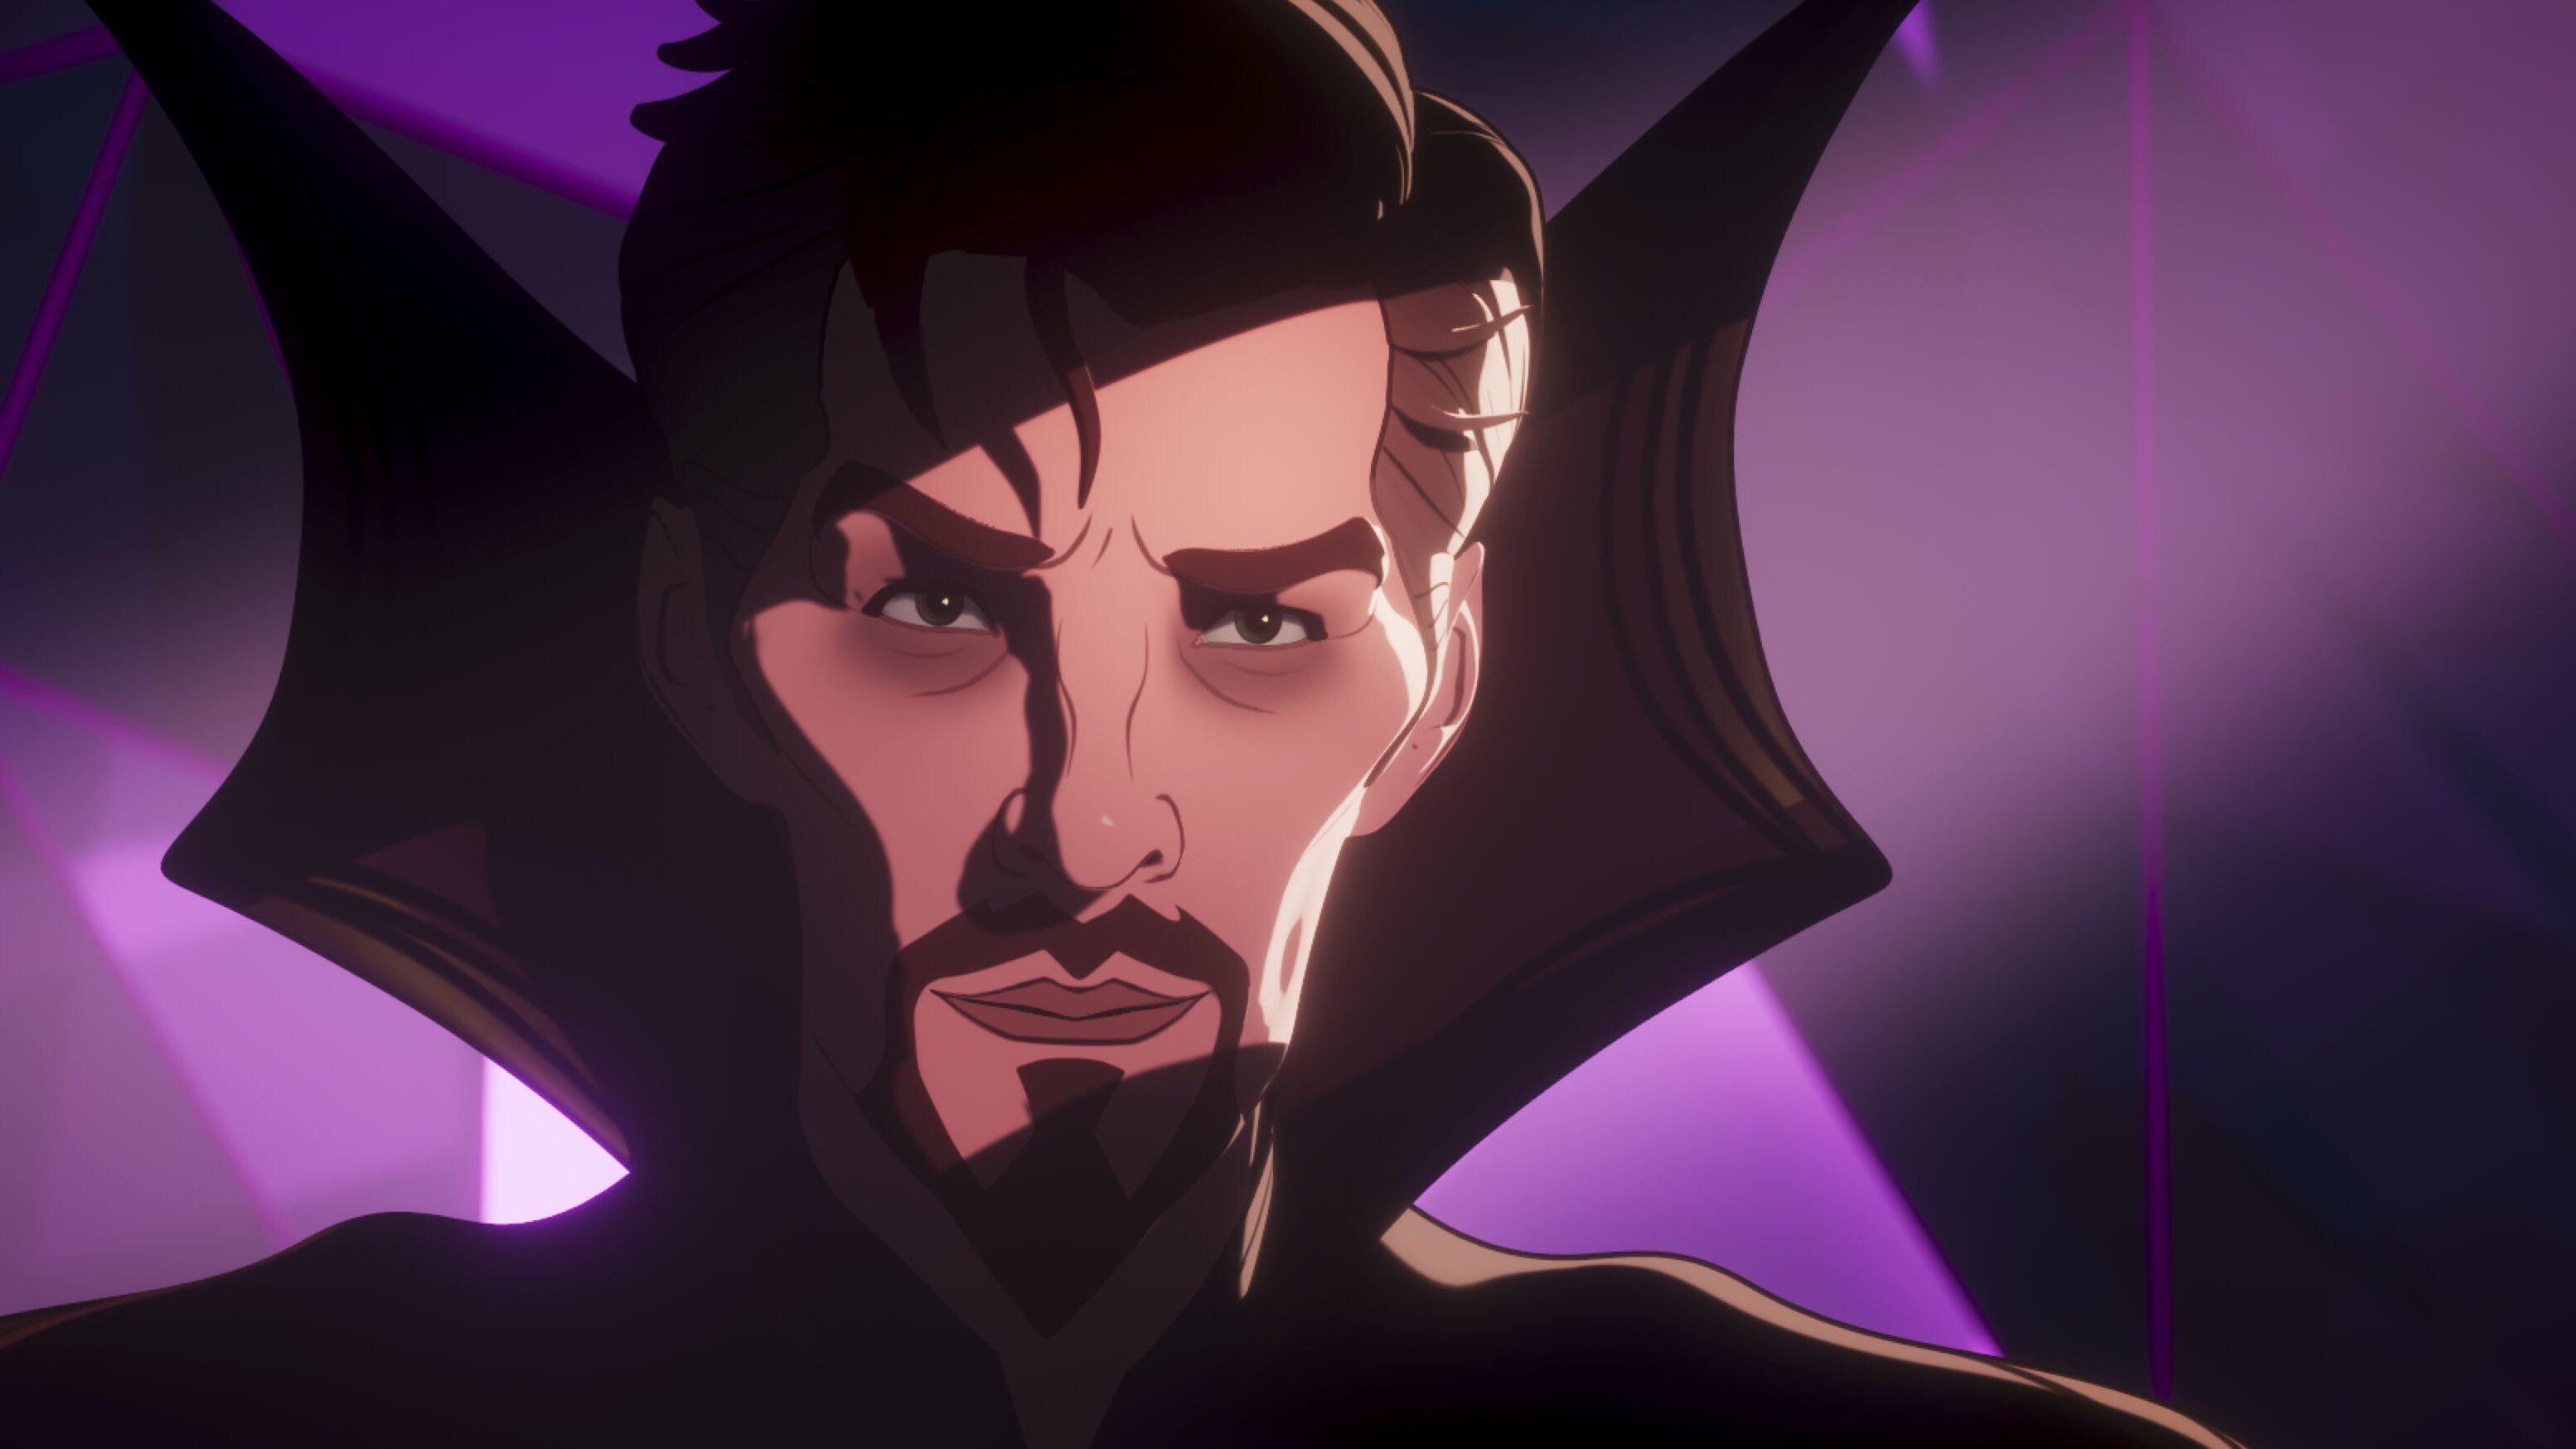 Doctor Strange Supreme in Marvel Studios' WHAT IF…? exclusively on Disney+. ©Marvel Studios 2021. All Rights Reserved.